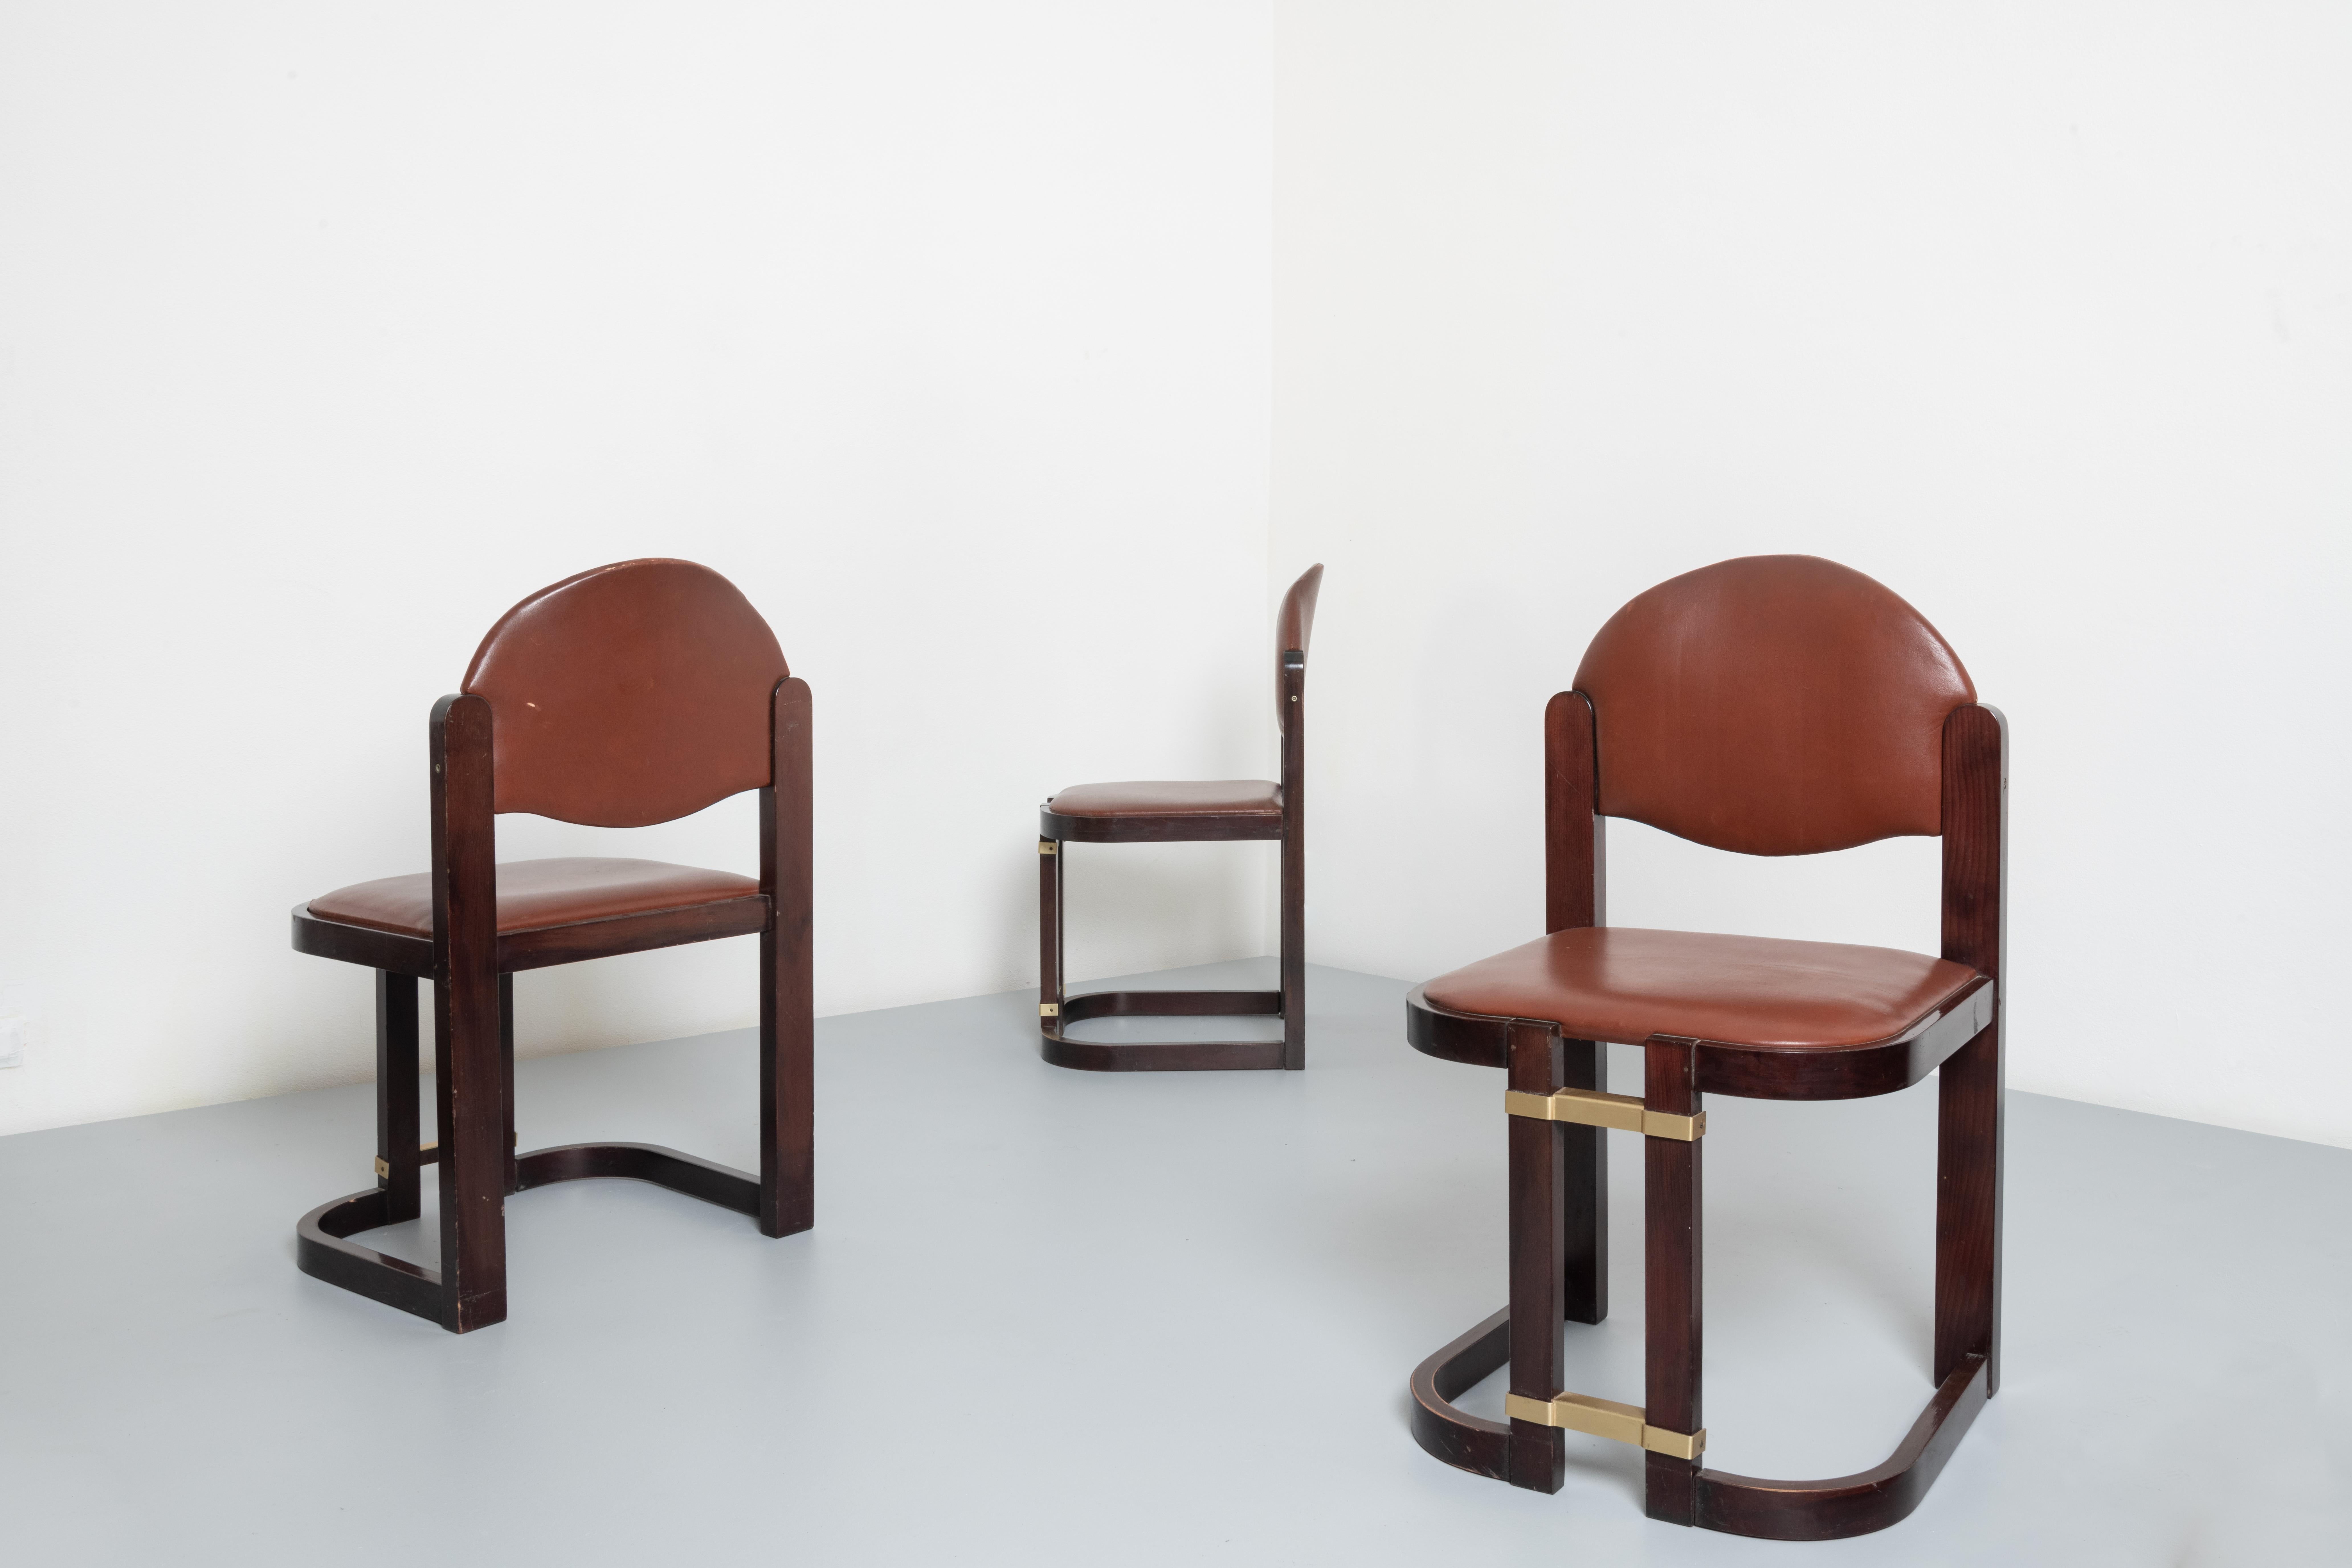 EN - This set of chairs attributed to Augusto Savini are of decorative taste. They are well suited to a dining room, kitchen or study. They have warm tones and a bold shape. It is a model with a rounded backrest, very much in vogue in the 1970s and